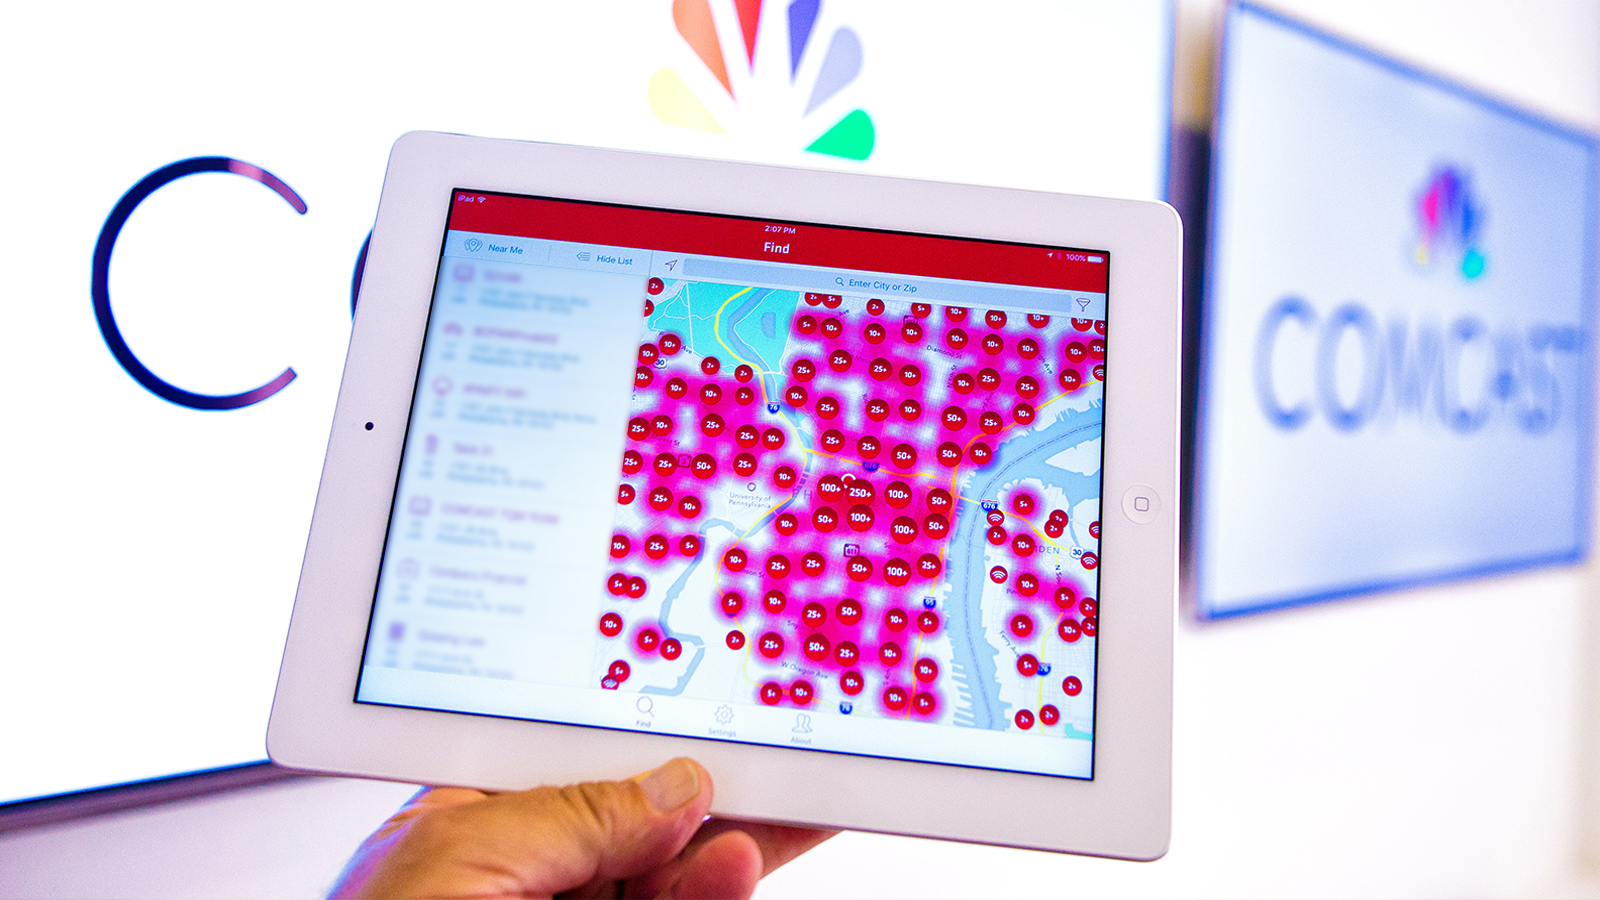 A map of Xfinity WiFi hotspots displayed on a tablet.